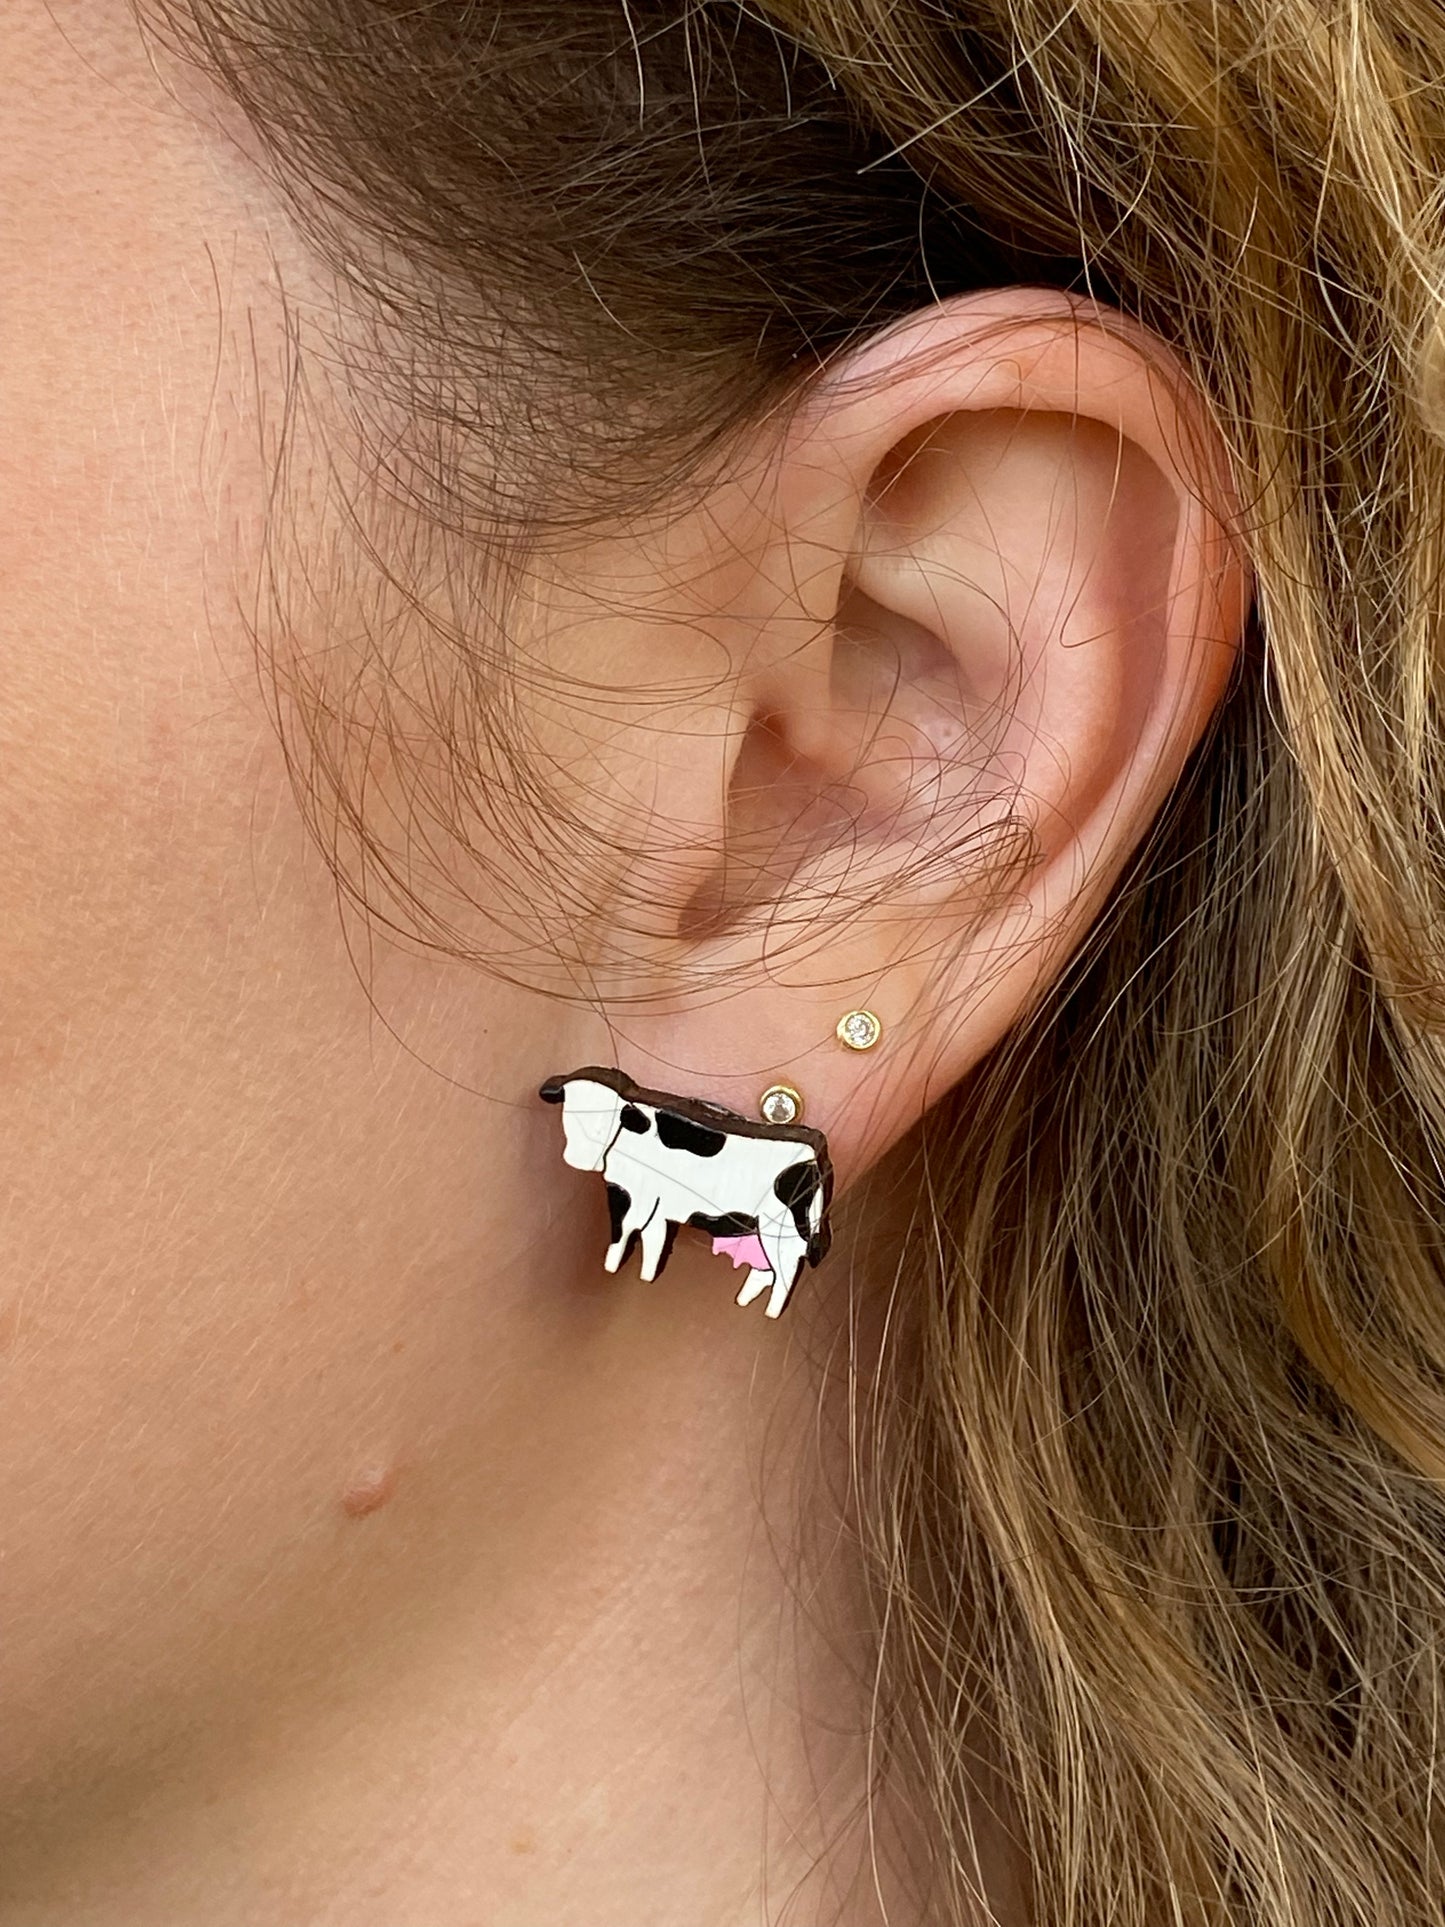 Cow Studs - 2 Colors Available